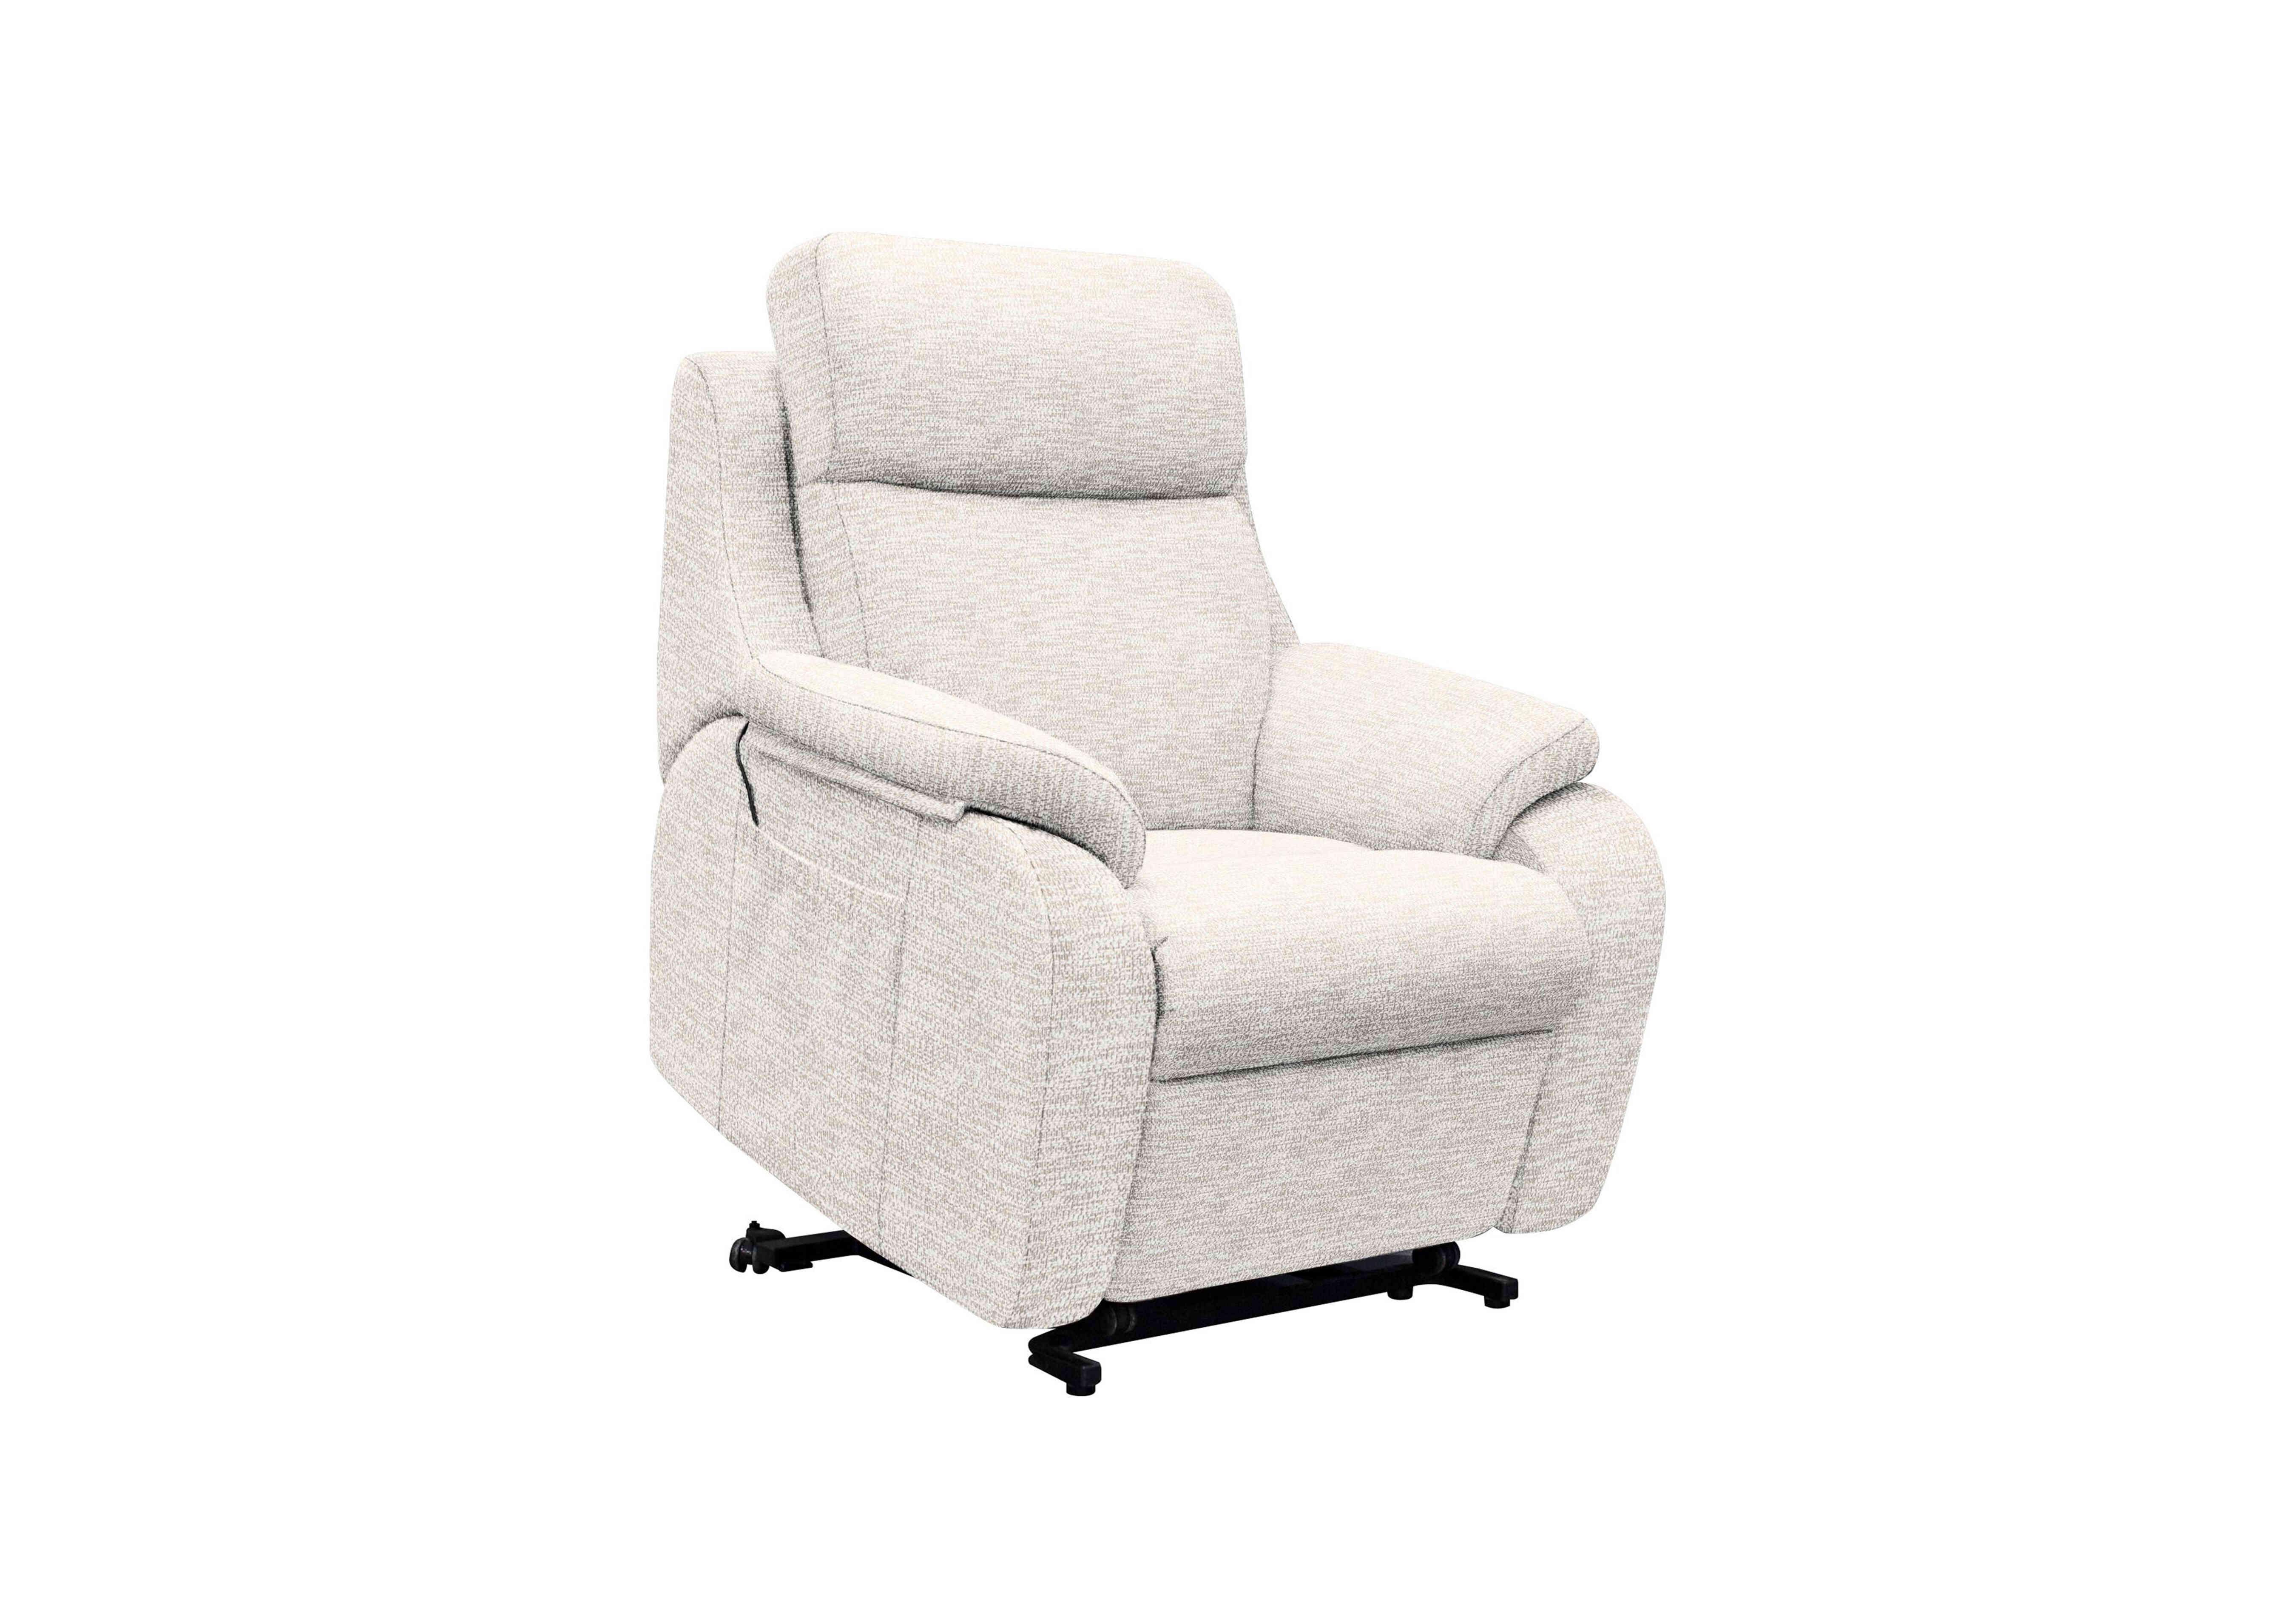 Kingsbury Large Fabric Lift and Rise Chair in C931 Rush Cream on Furniture Village